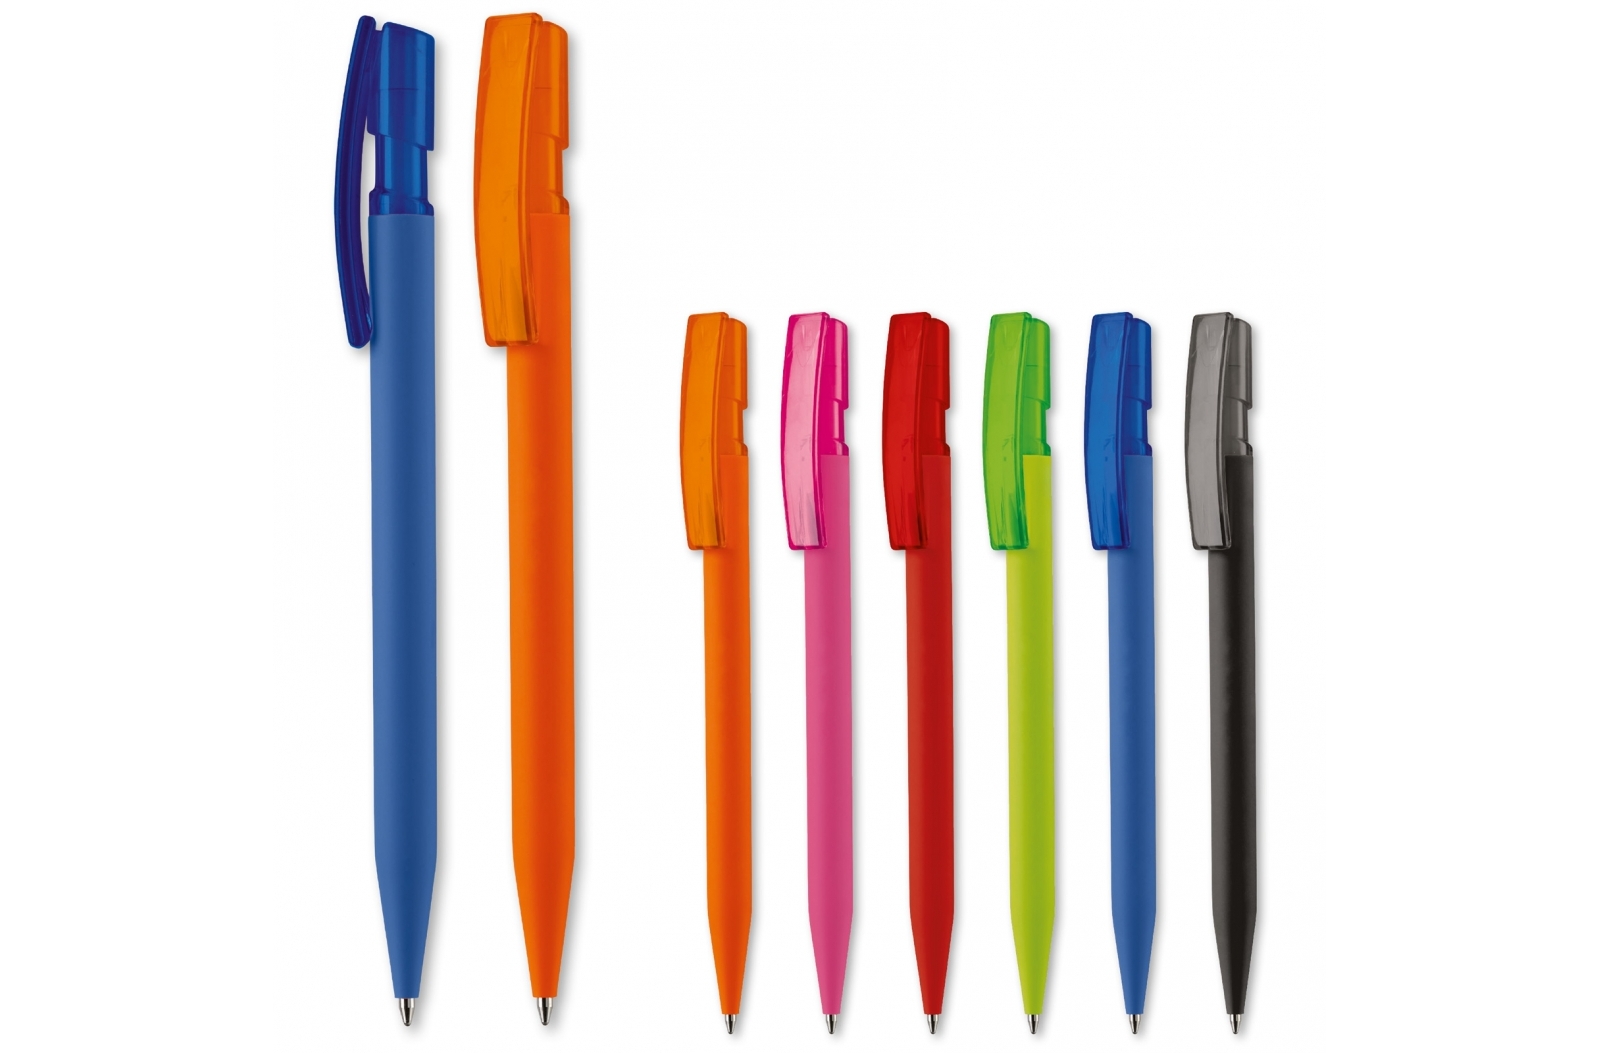 Blue Pen for Writing - Excellent for Snoring - Sandwell